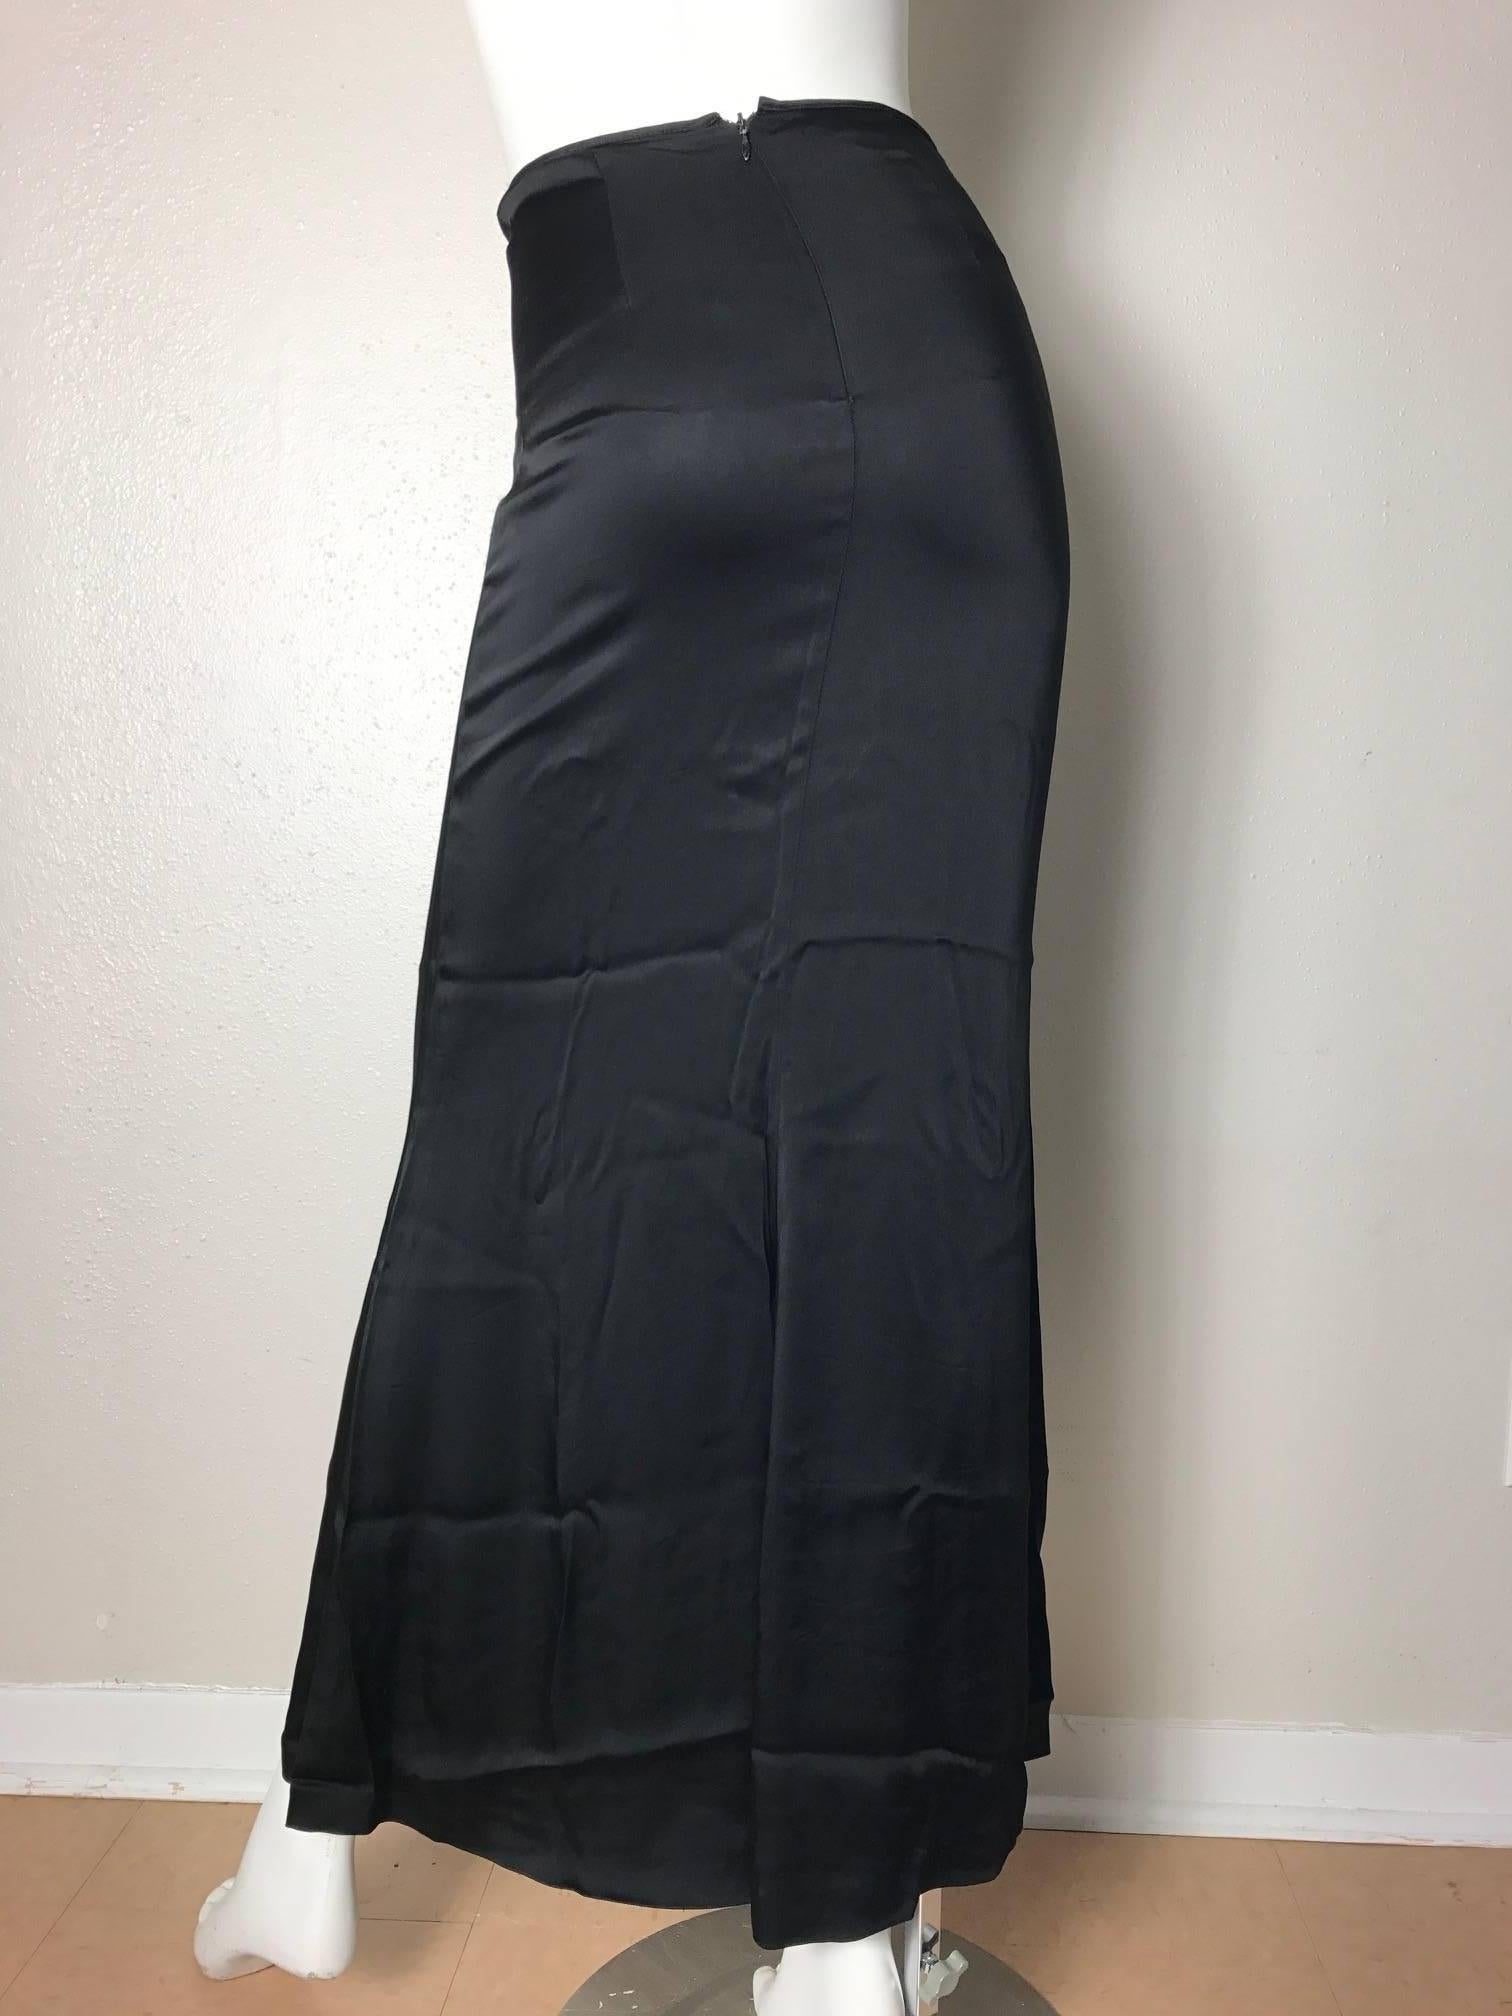 1990s Jean Paul Gaultier Classique satin skirt.  Condition: Excellent. Size 6

We accept returns for refund, please see our terms.  We offer free ground shipping within the US.  Please let us know if you have any questions.